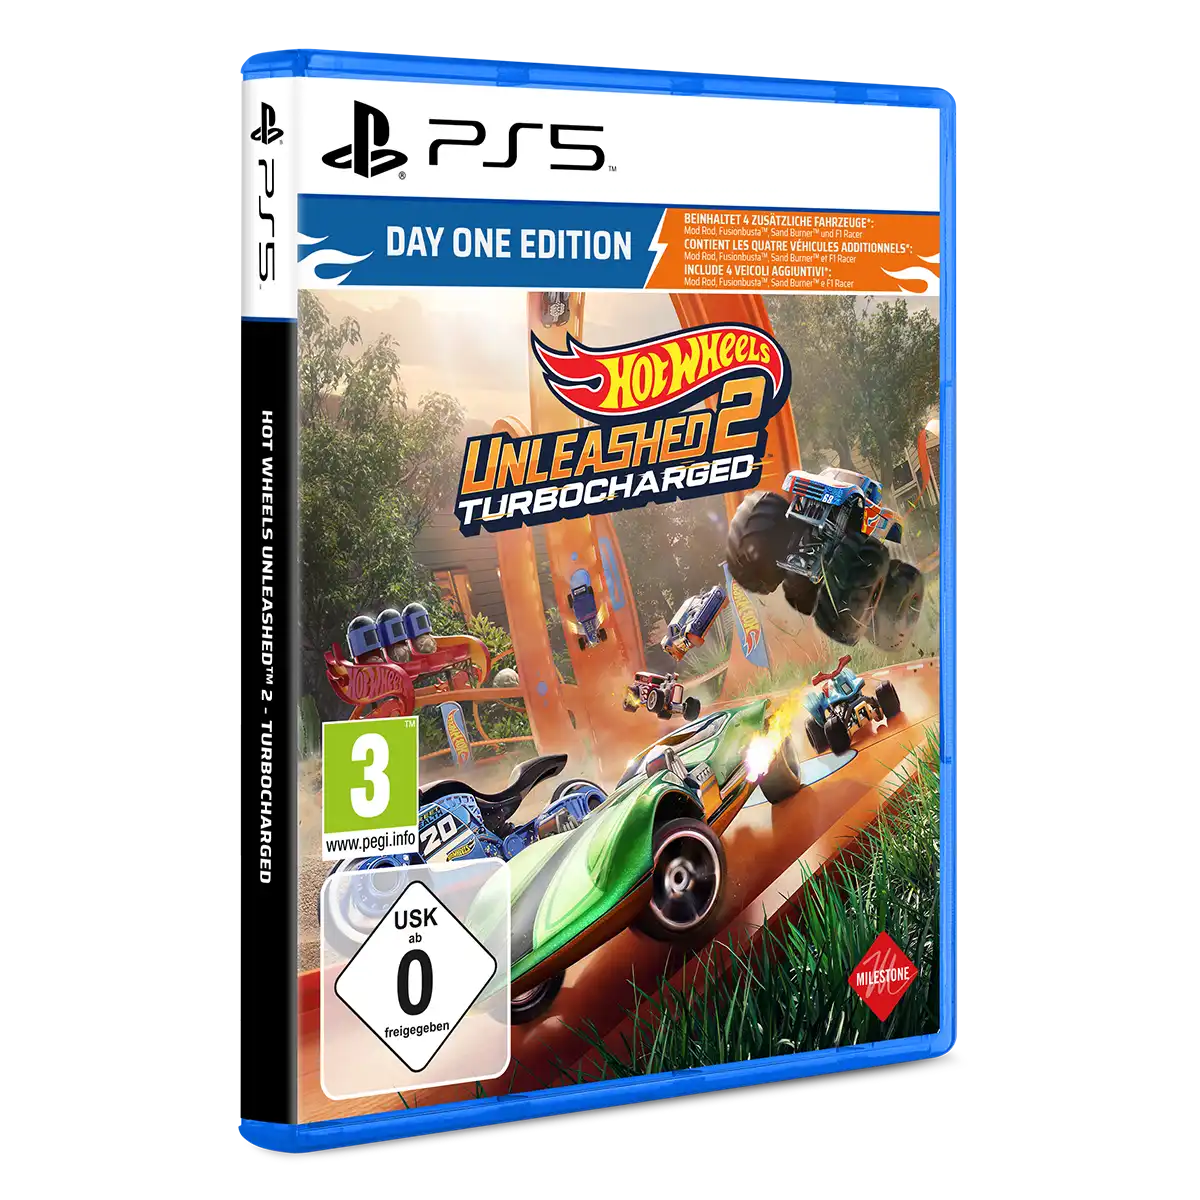 Hot Wheels Unleashed™ 2 Turbocharged Day One Edition (PS5) Thumbnail 2